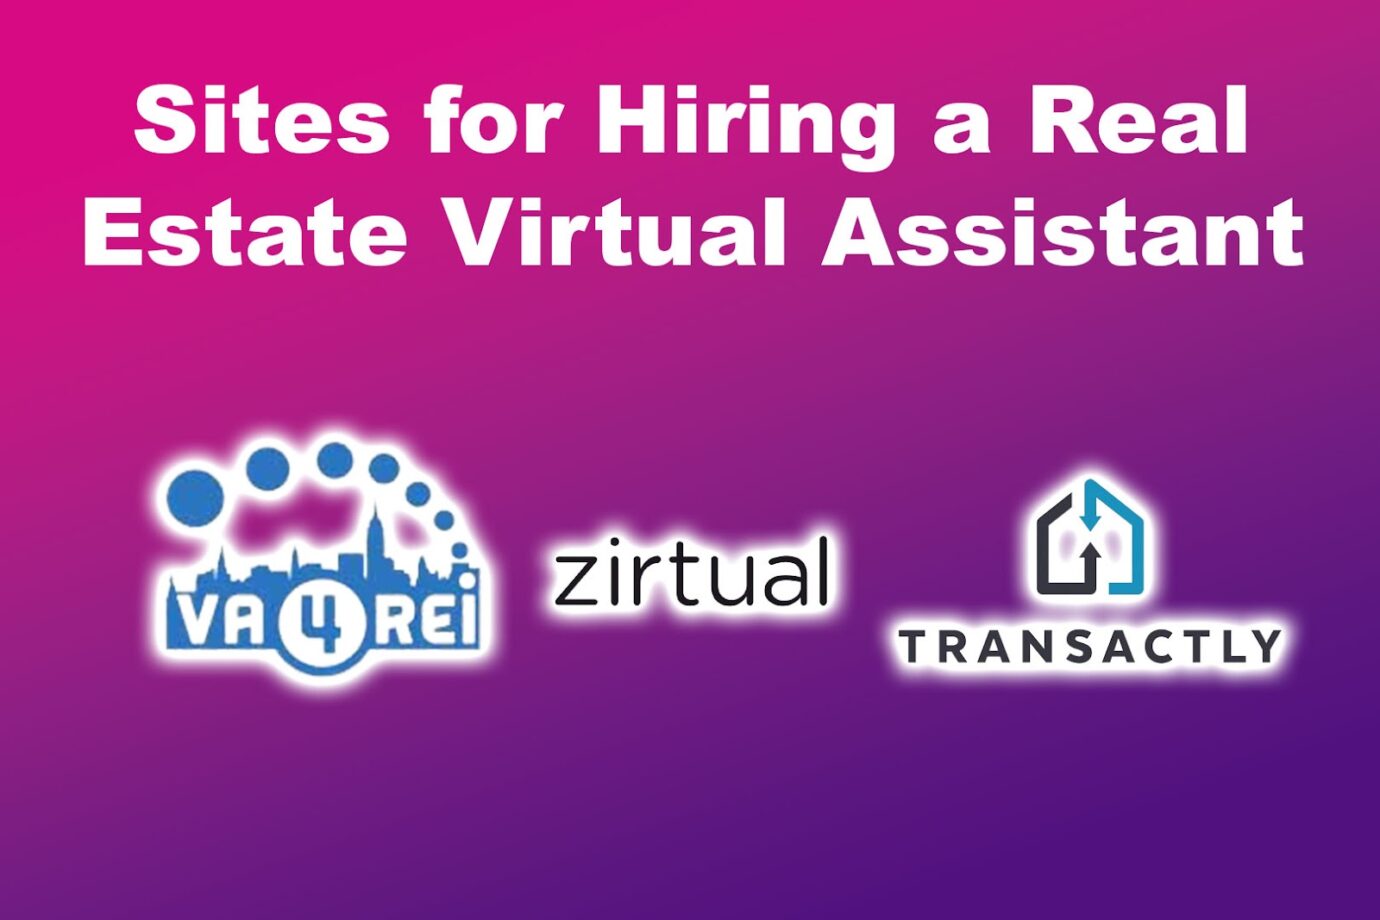 Sites for Hiring a Real Estate Virtual Assistant